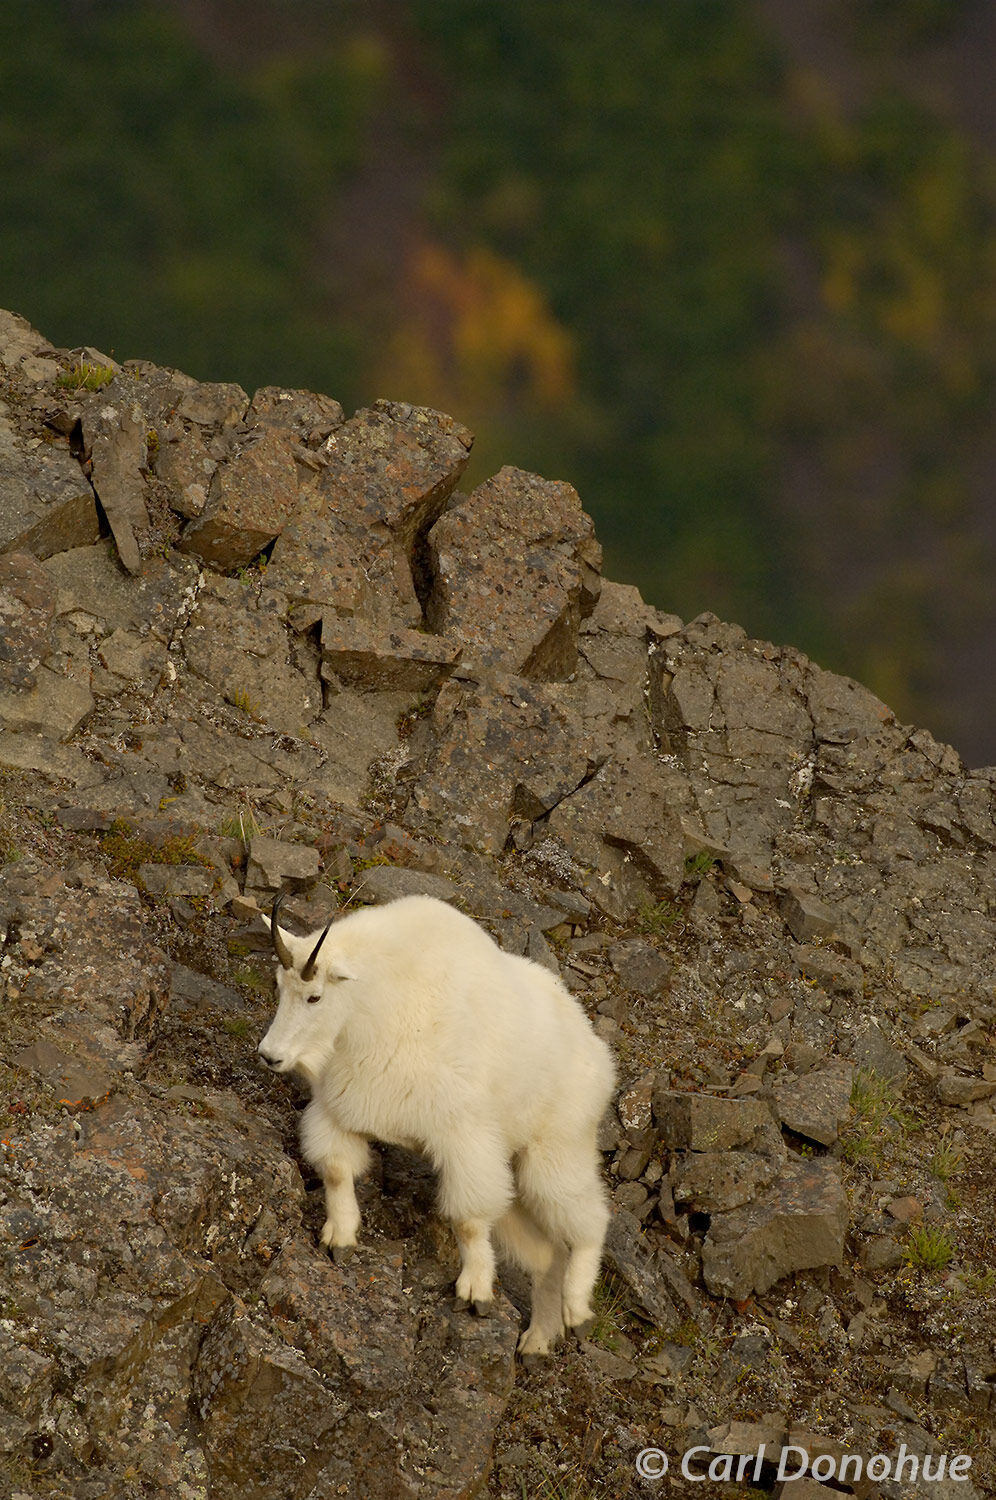 The mountain goat is a solitary animal, and this photograph captures one wandering the wilds of Wrangell-St. Elias National Park...